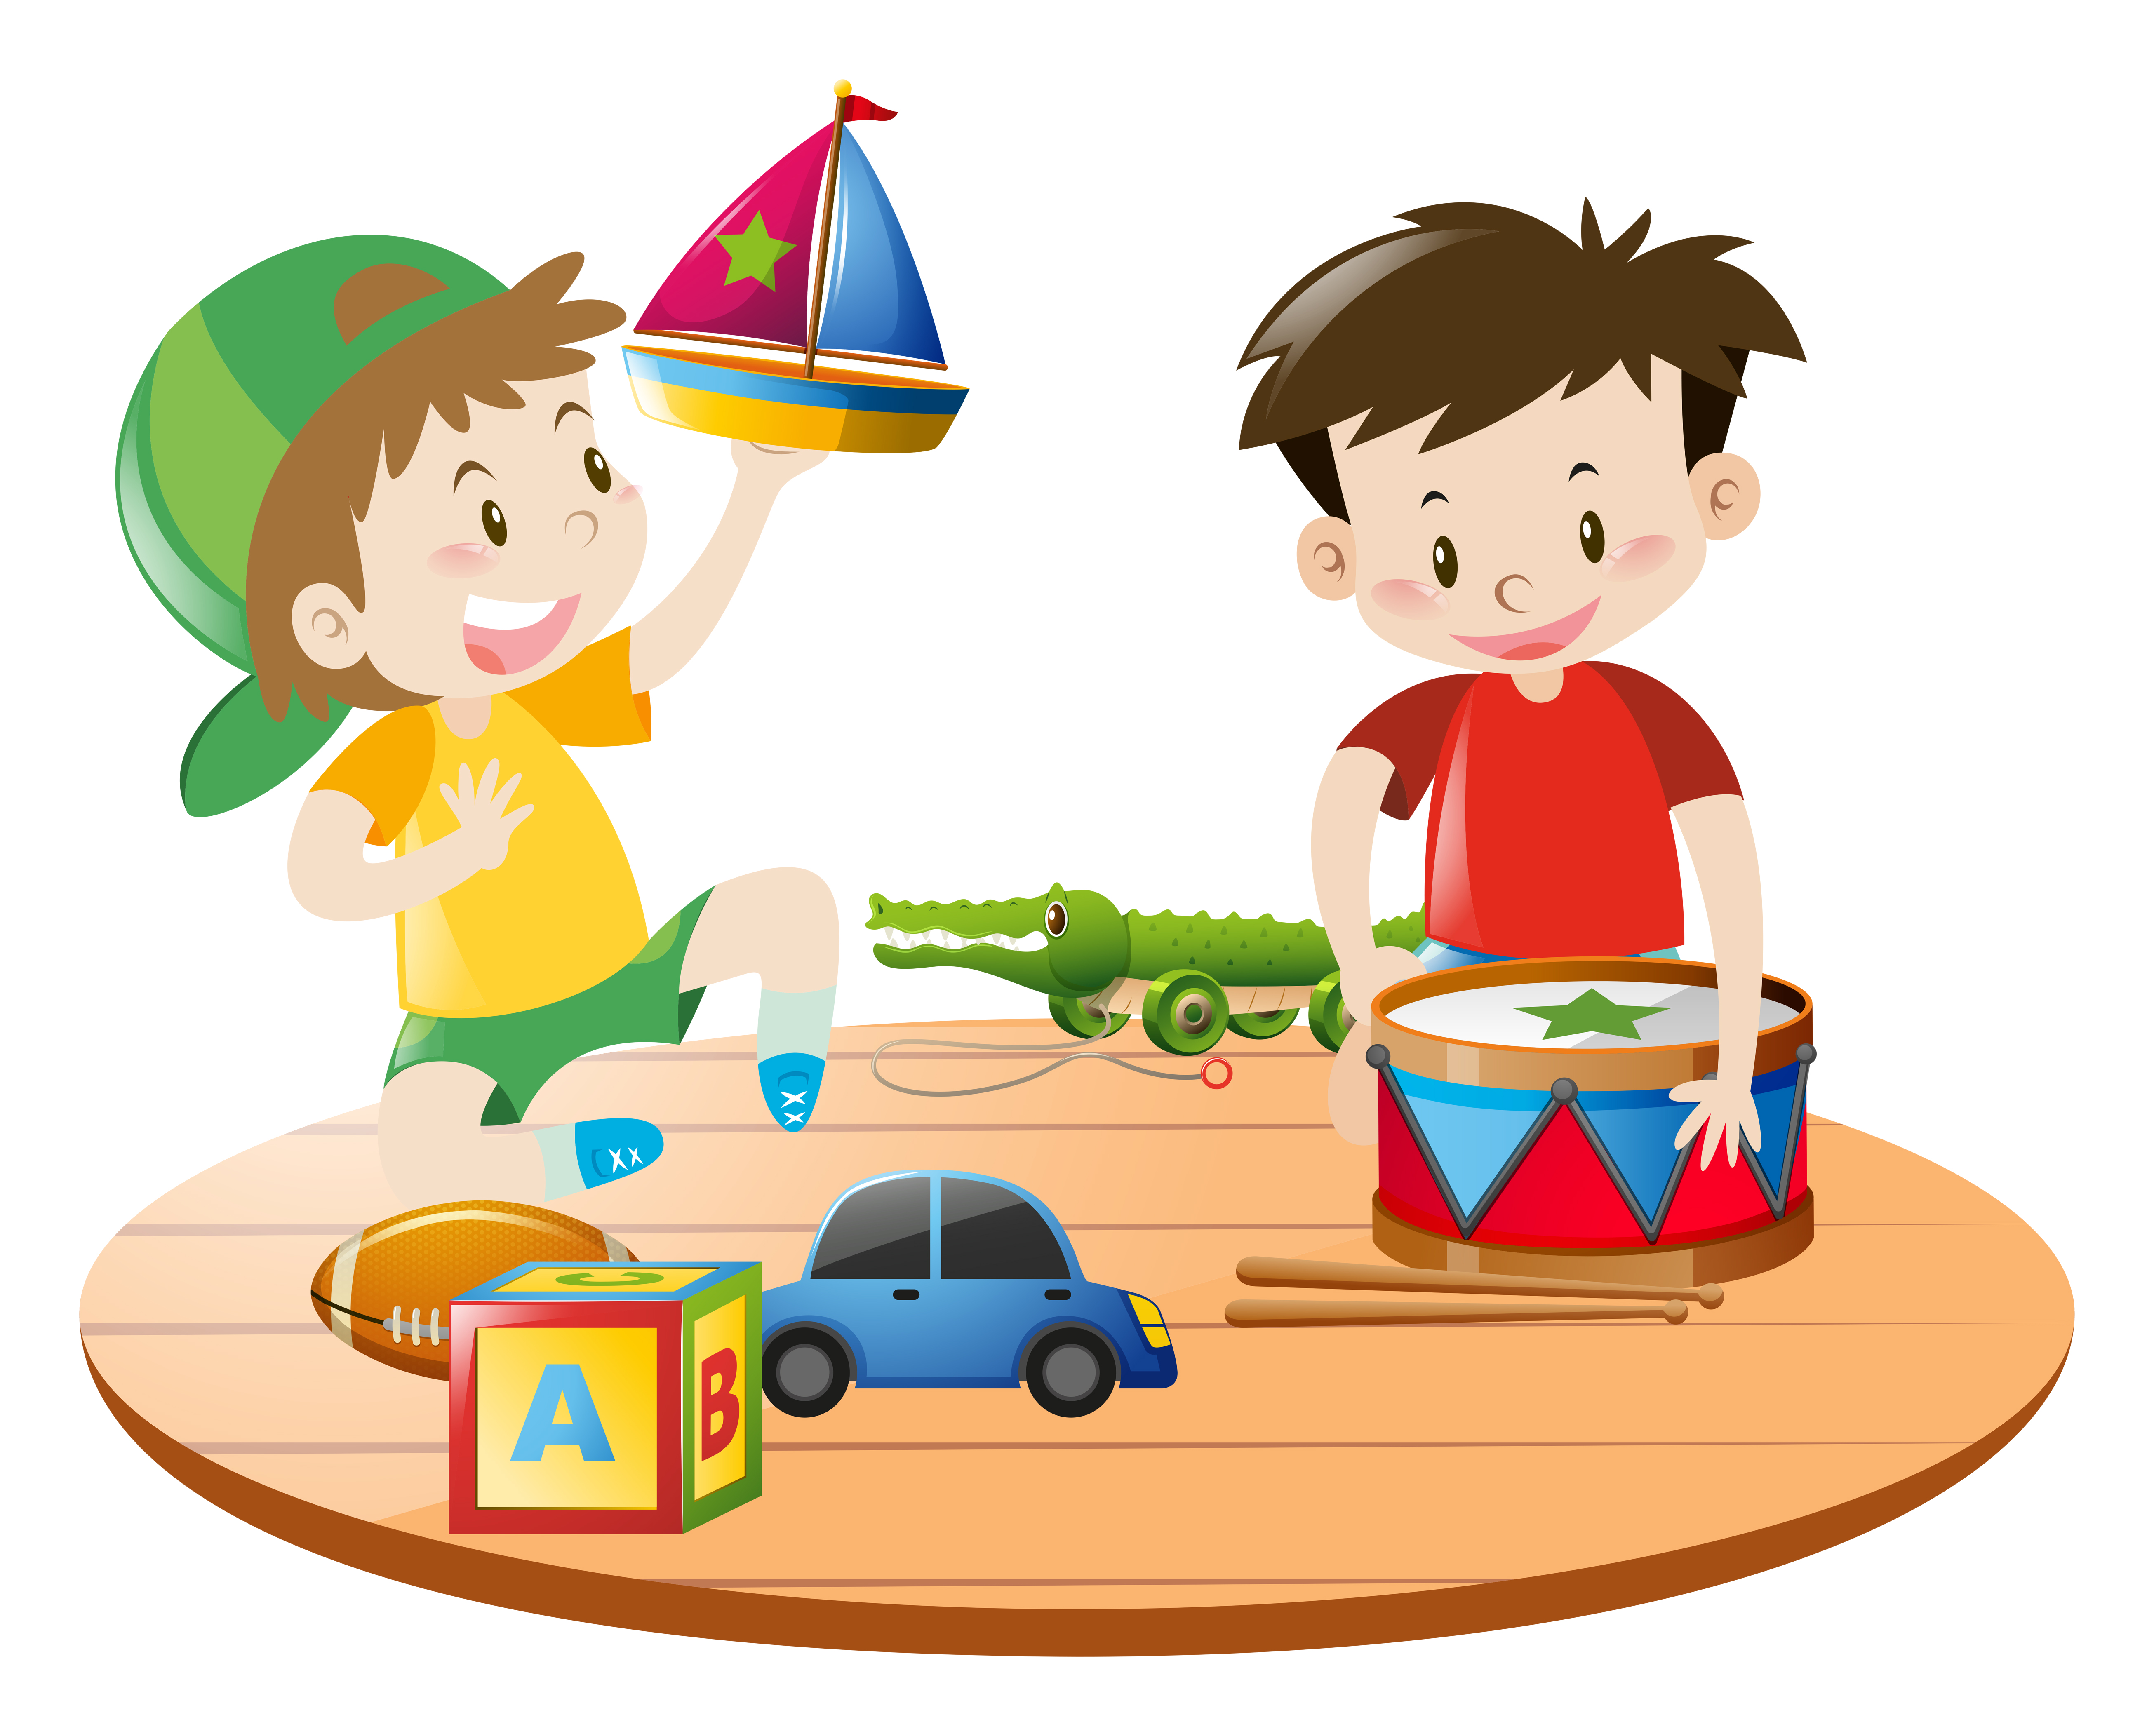 A boy playing toys Royalty Free Vector Image - VectorStock